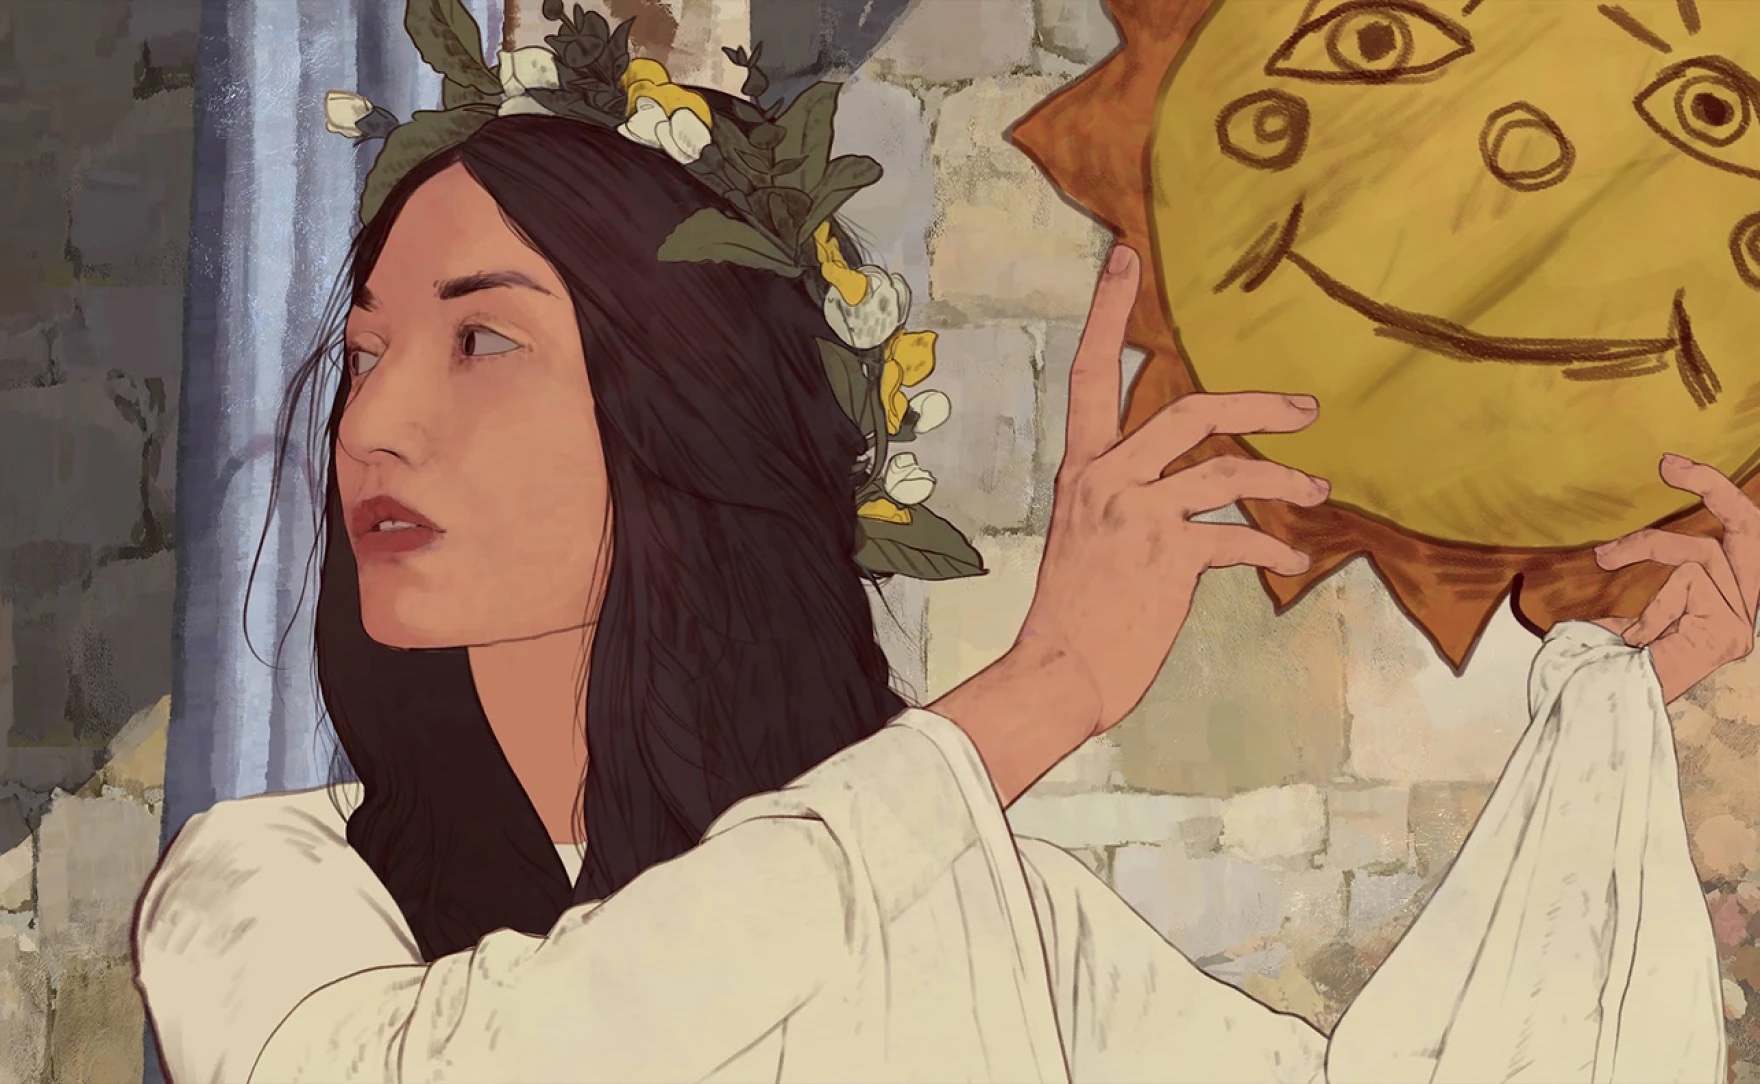 An image from the animated documentary Aurora’s Sunrise, picturing historical figure Aurora Mardiganian in a white flowing gown and flower crown, holding up a smiling sun mask and looking over her shoulder